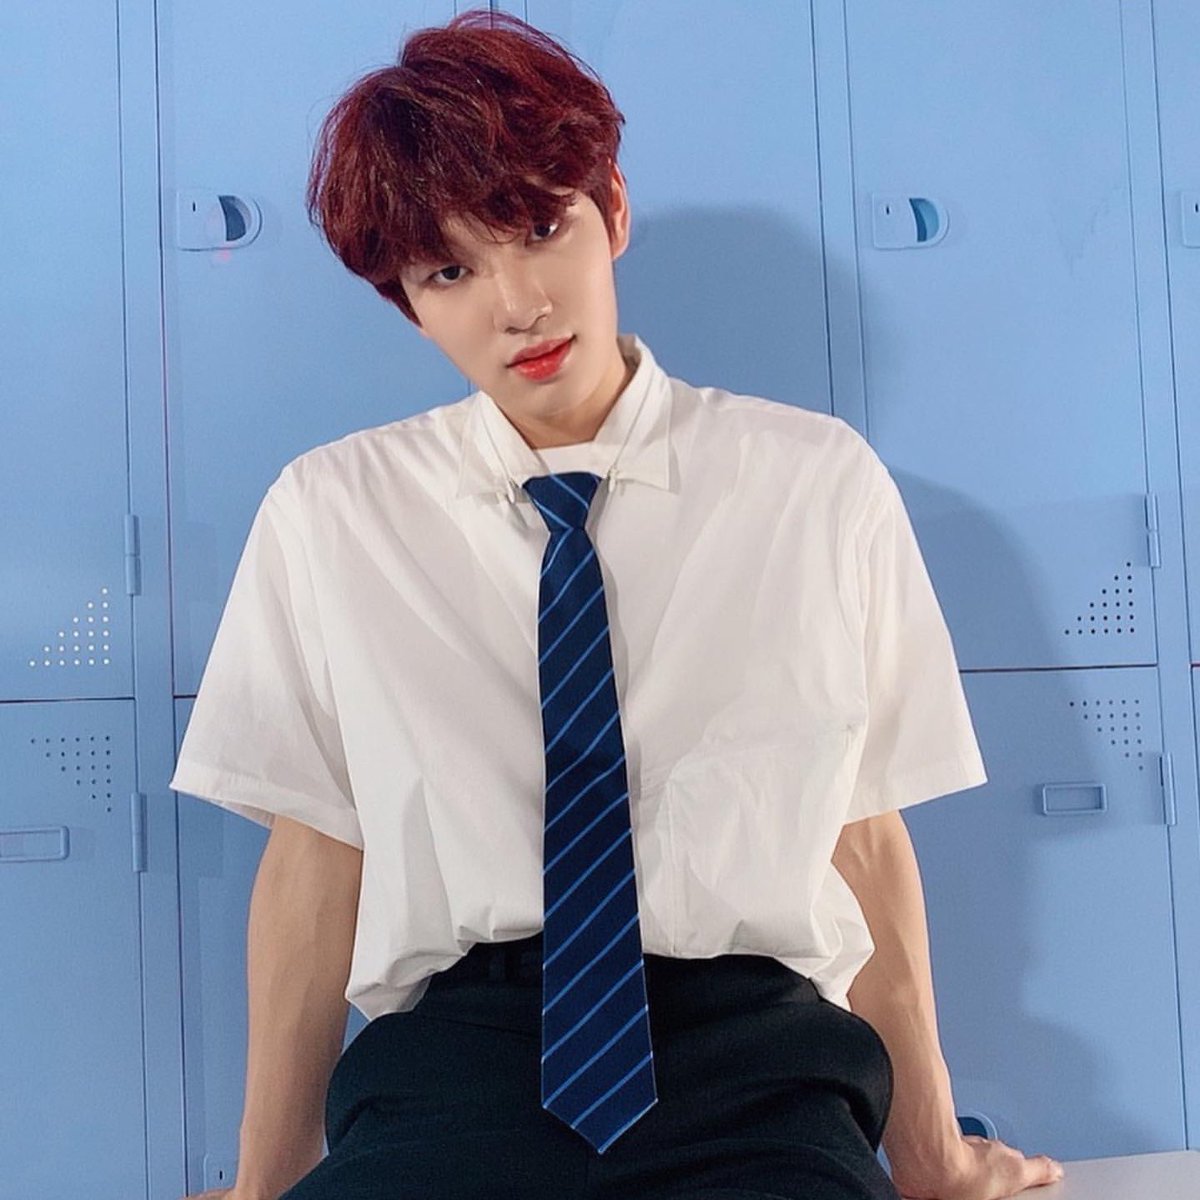 huijun⇢ the smartest kid in class⇢ probably charges people to do their hw⇢ intimidating⇢ but actually just introverted and shy⇢ the “mysterious” kid⇢ listens to music all day w his headphones on⇢ will probably fight a bitch⇢ when he smiles everyone goes crazy